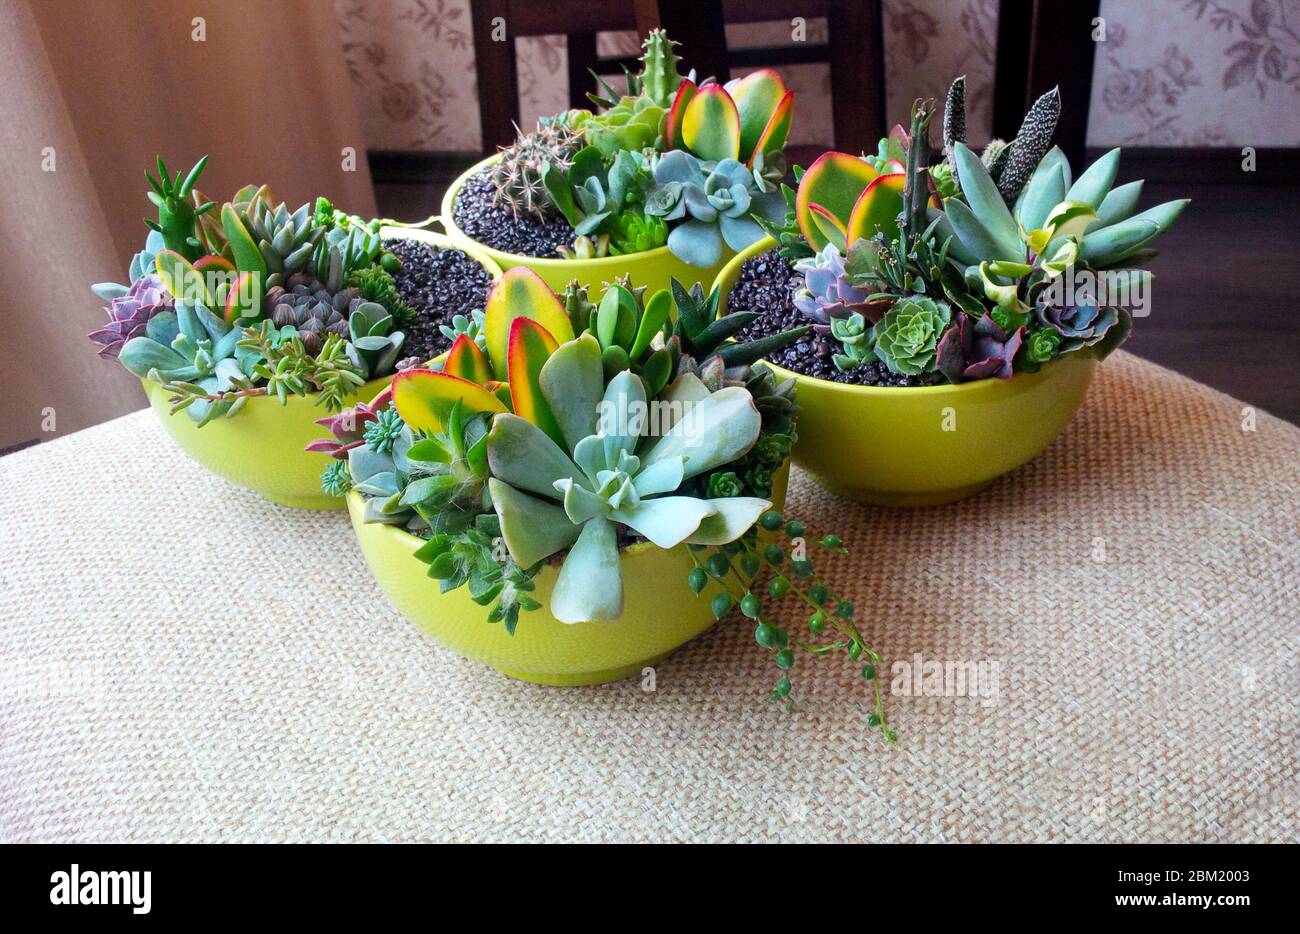 Colorful succulent plants composition in bright lime bowls on beige interior background Stock Photo